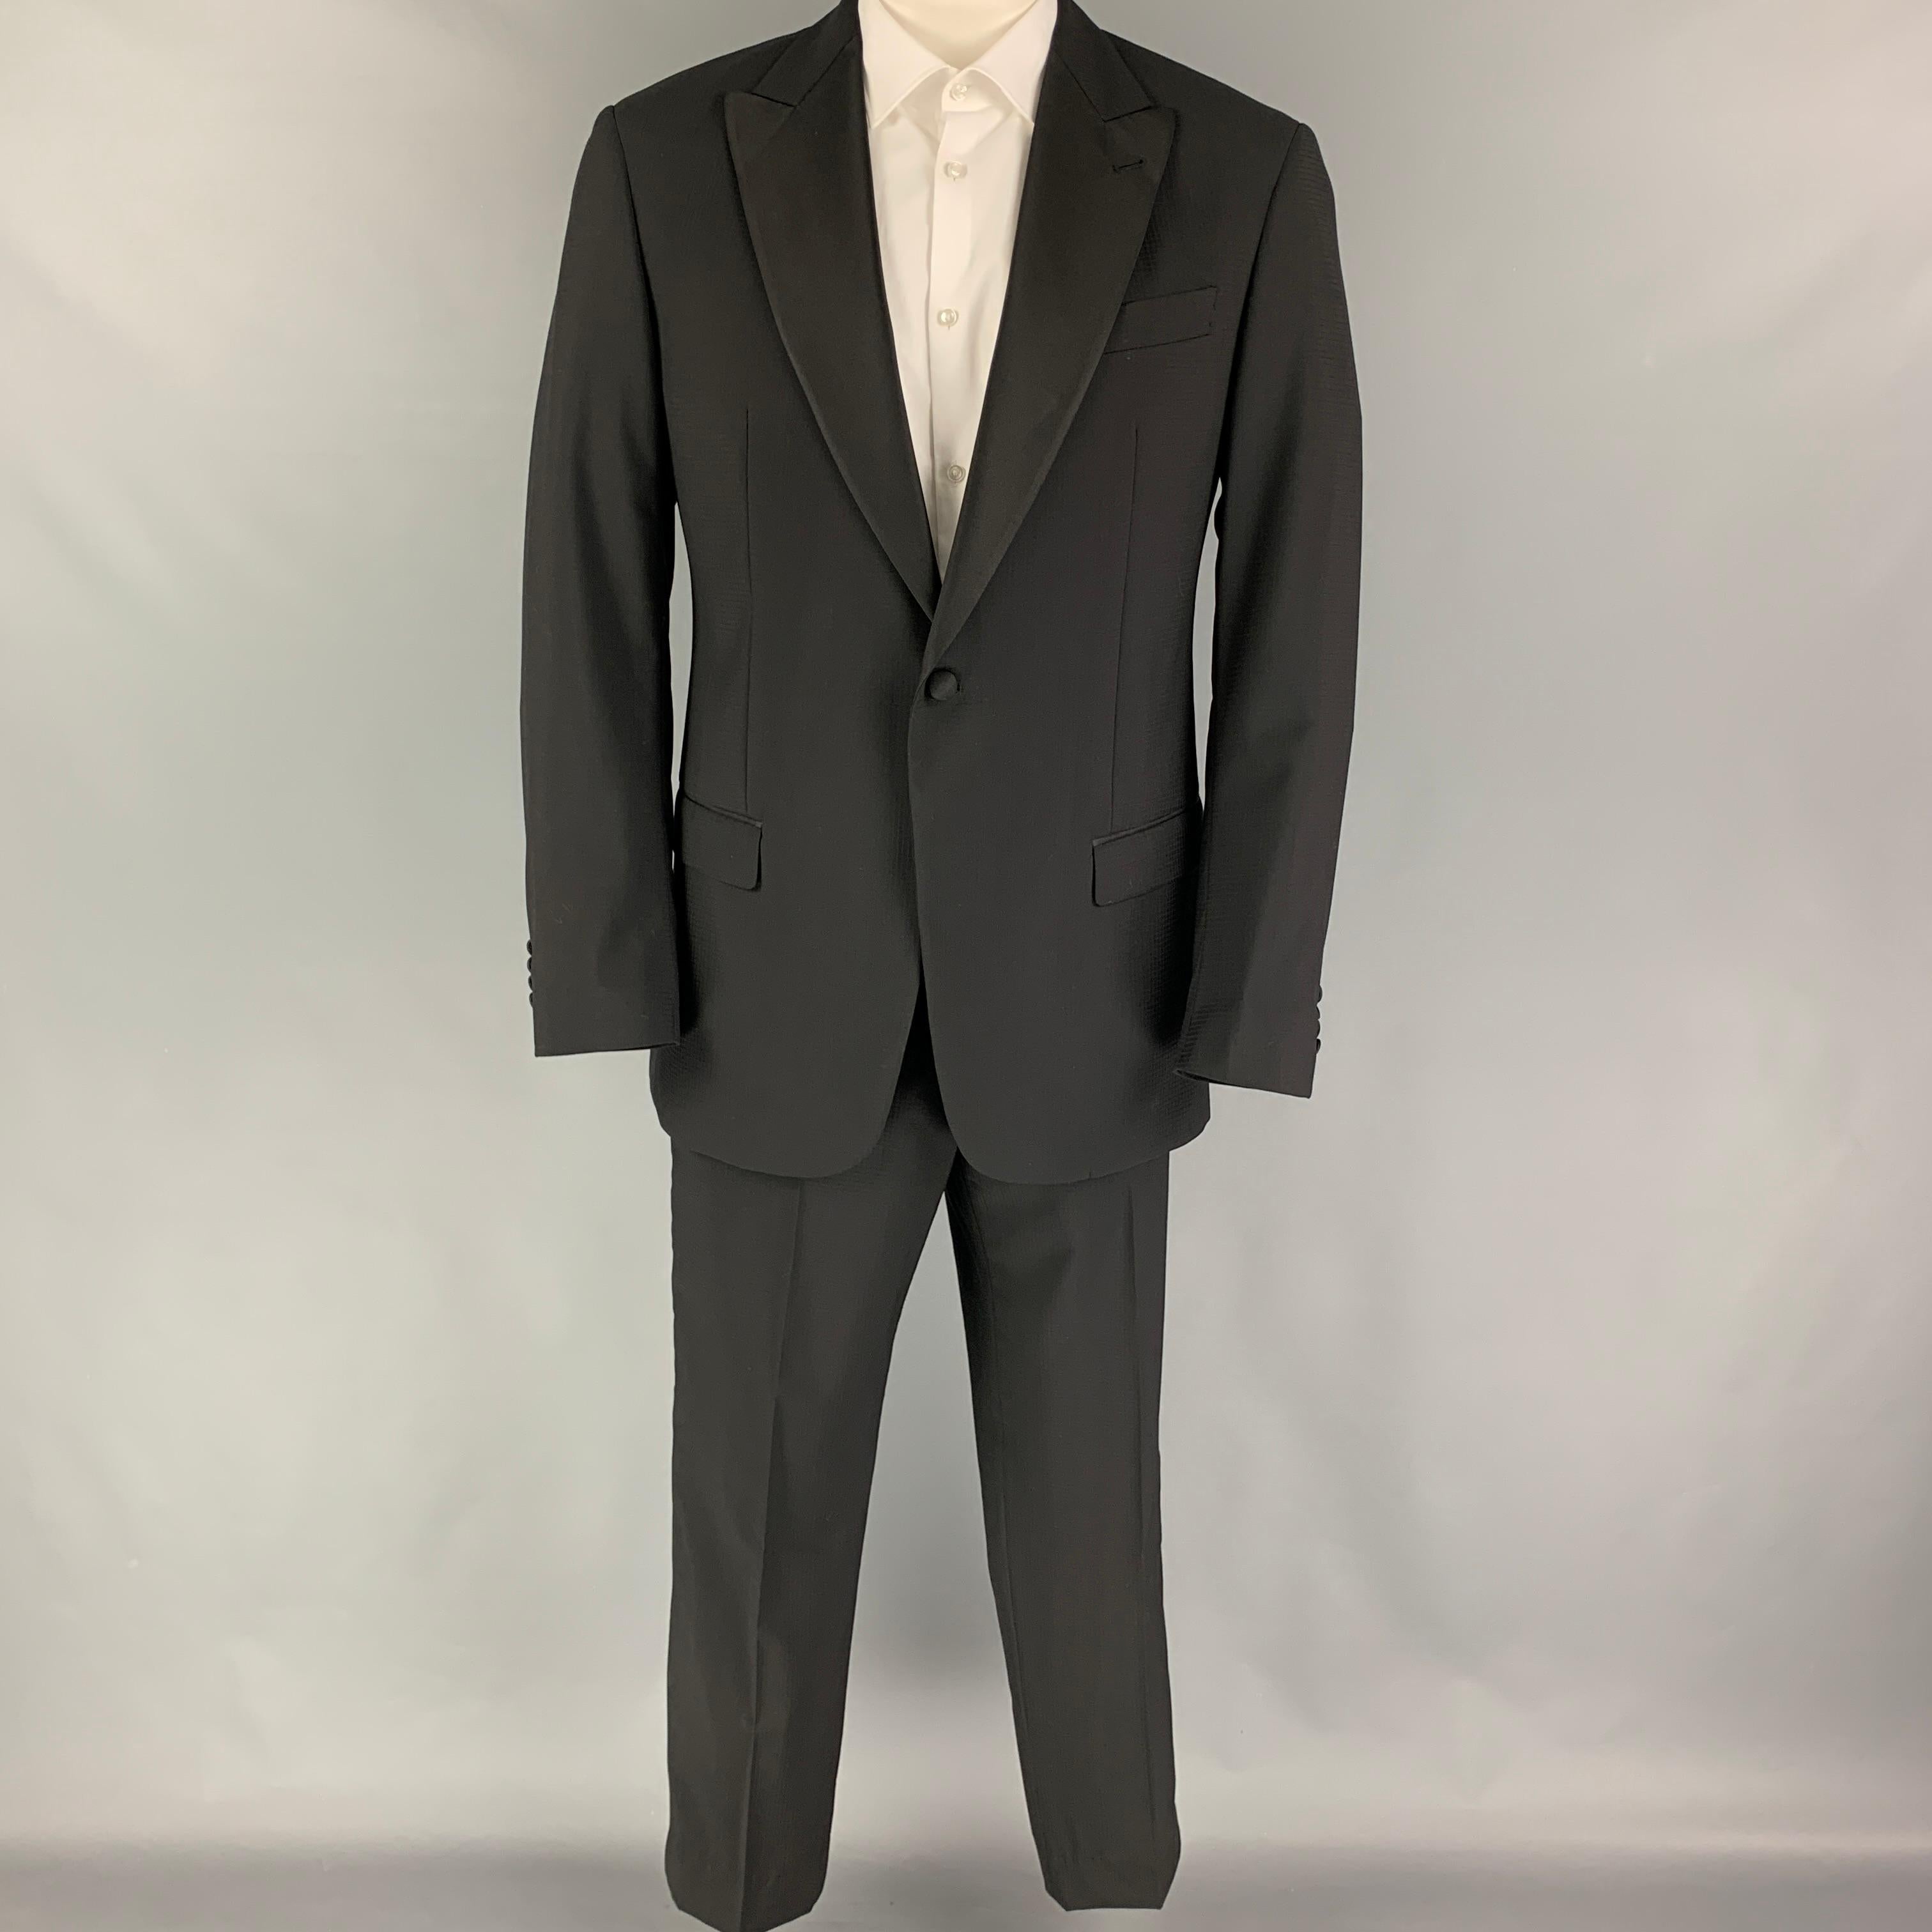 EMPORIO ARMANI suit comes in a black grid material with a full liner and includes a single breasted, single button sport coat with a peak lapel and matching flat front trousers.

Excellent Pre-Owned Condition. Fabric tag removed.
Marked: Size tag